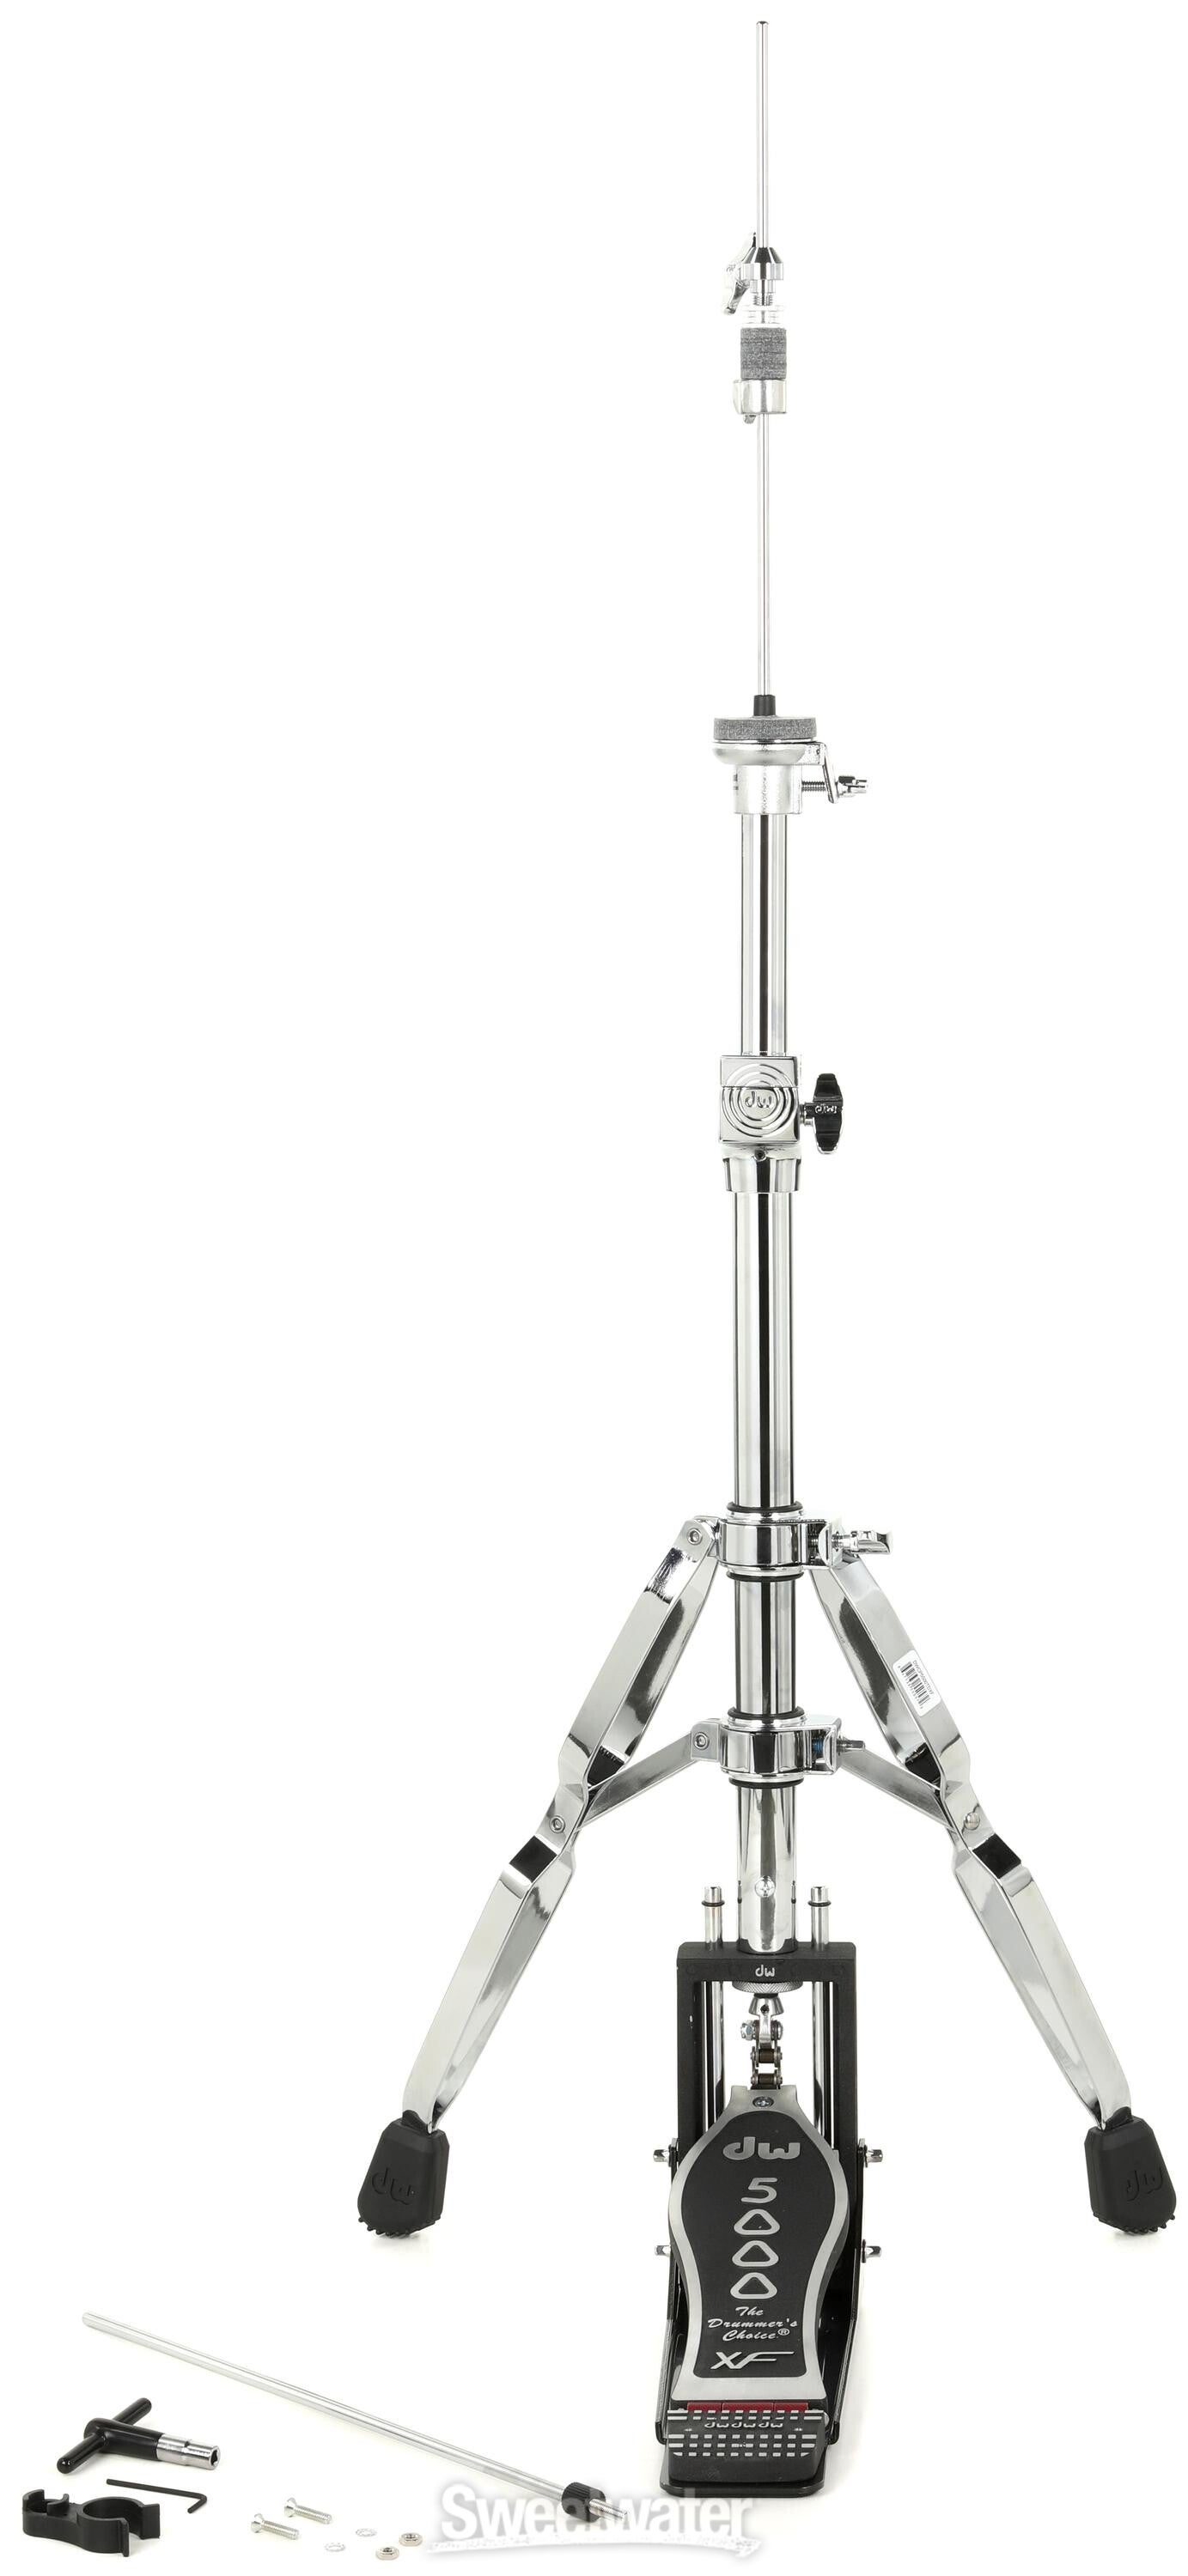 DW DWCP5500DXF Delta II Series Heavy Duty Hi-hat Stand with